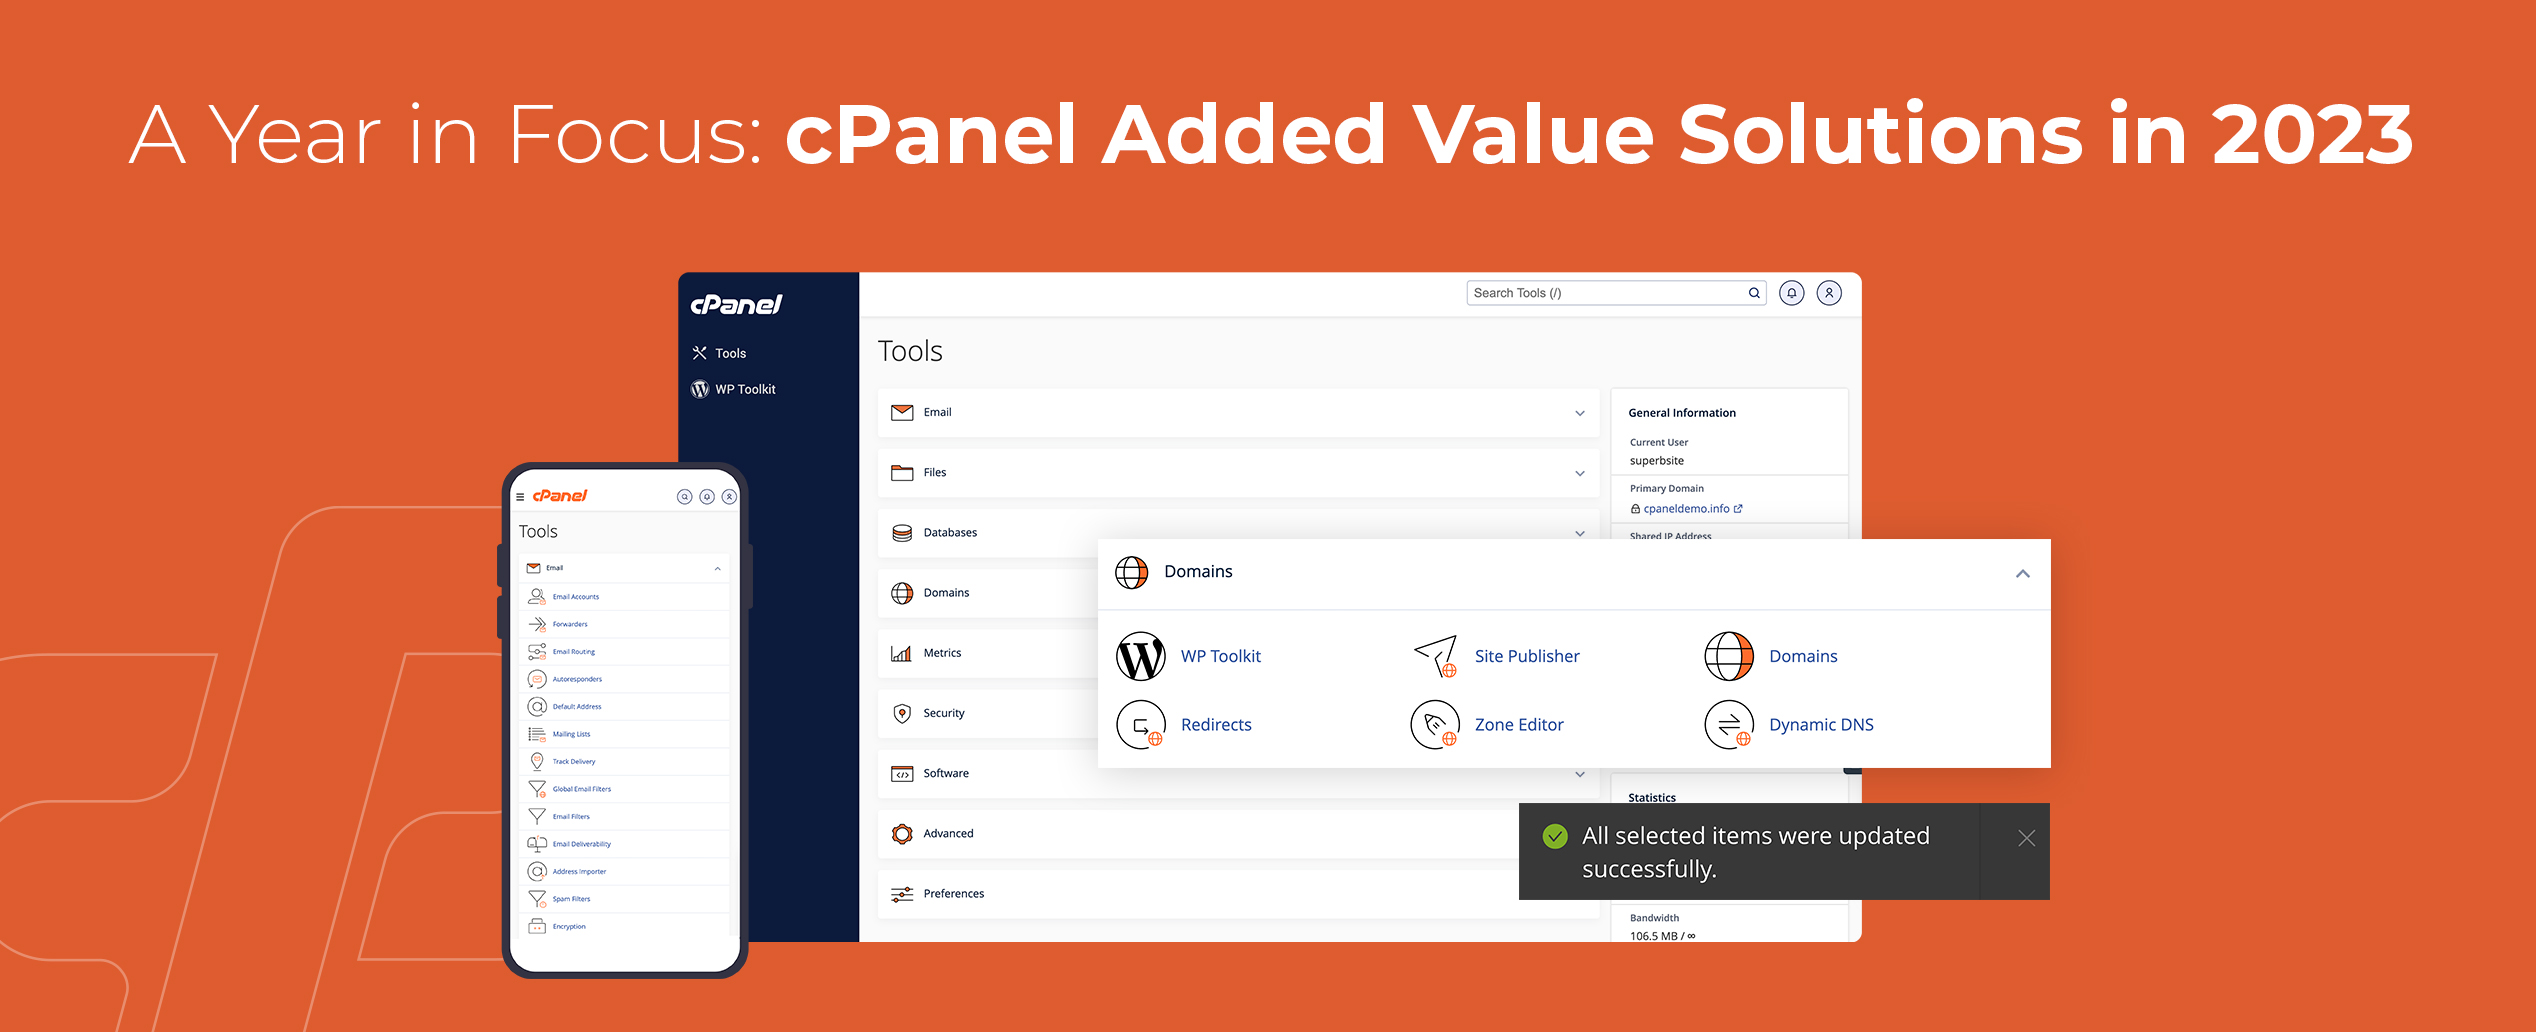 A Year in Focus: cPanel Added Value Solutions in 2023 | cPanel